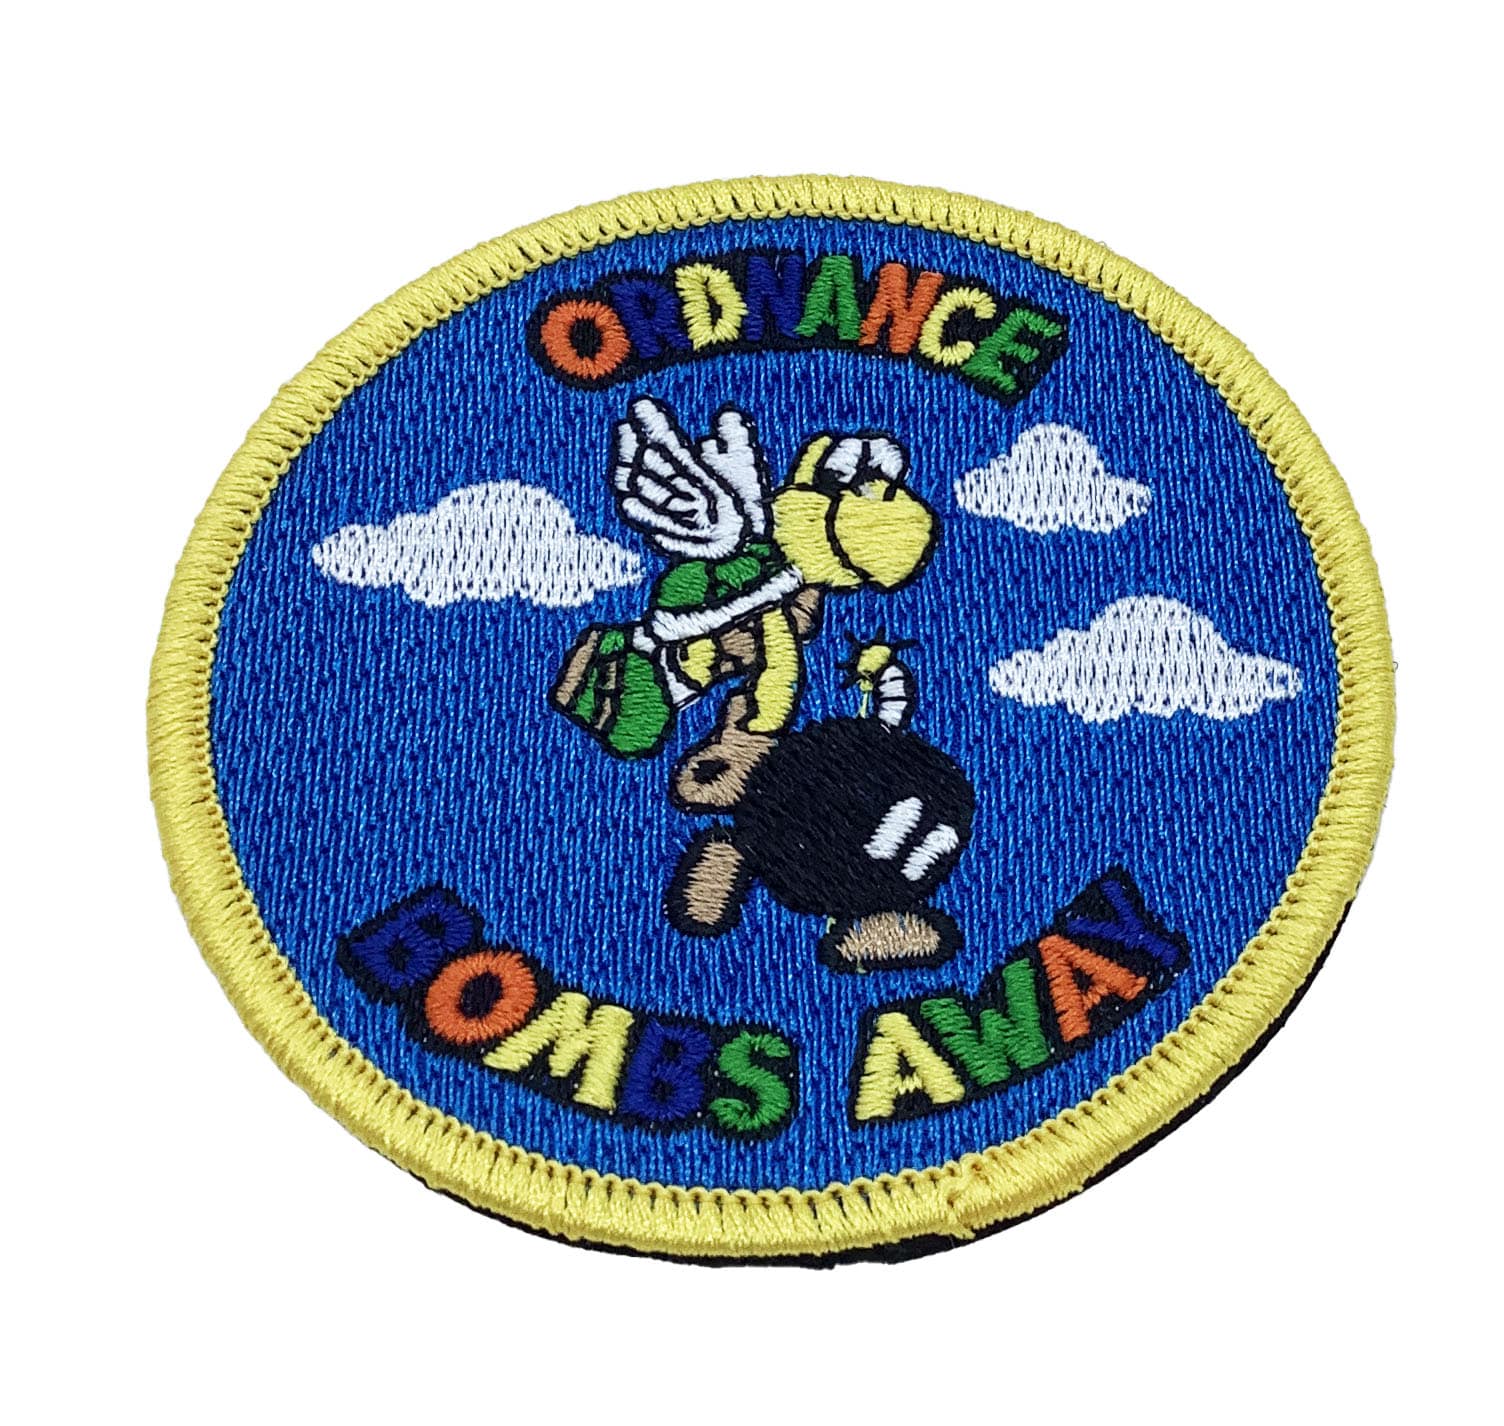 Ordnance Bombs Away Patch – Hook and Loop